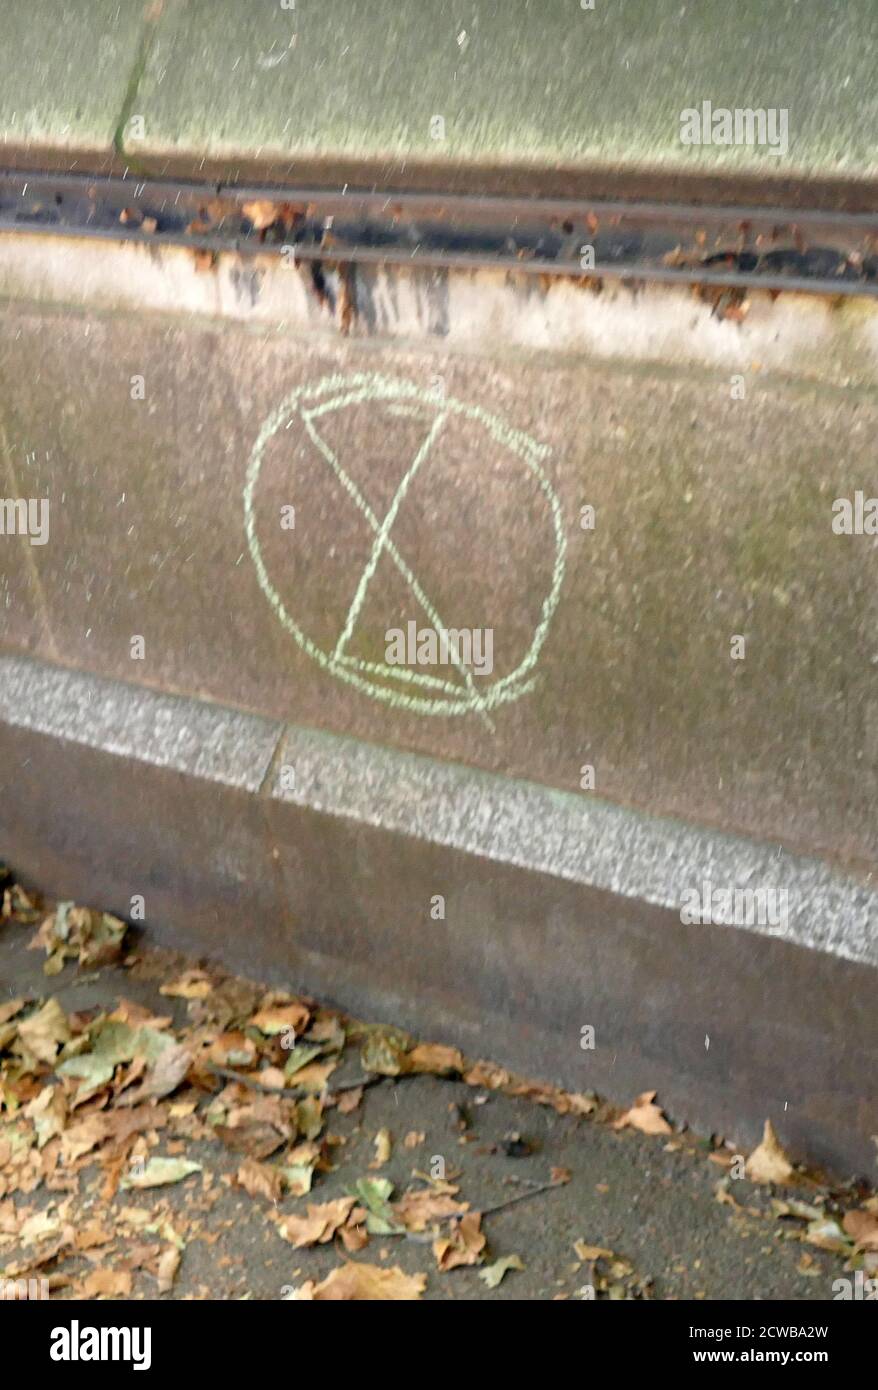 Extinction Rebellion logo on a wall, London, 2019. Extinction Rebellion is a political movement with the stated aim of using civil disobedience and nonviolent resistance to compel government action on climate breakdown, biodiversity loss, and the risk of social and ecological collapse. Extinction Rebellion was established in the United Kingdom in May 2018 with about one hundred academics signing a call to action in support in October 2018. In April 2019 Extinction Rebellion occupied 5 prominent sites in central London: Piccadilly Circus, Oxford Circus, Marble Arch, Waterloo Bridge and the area Stock Photo